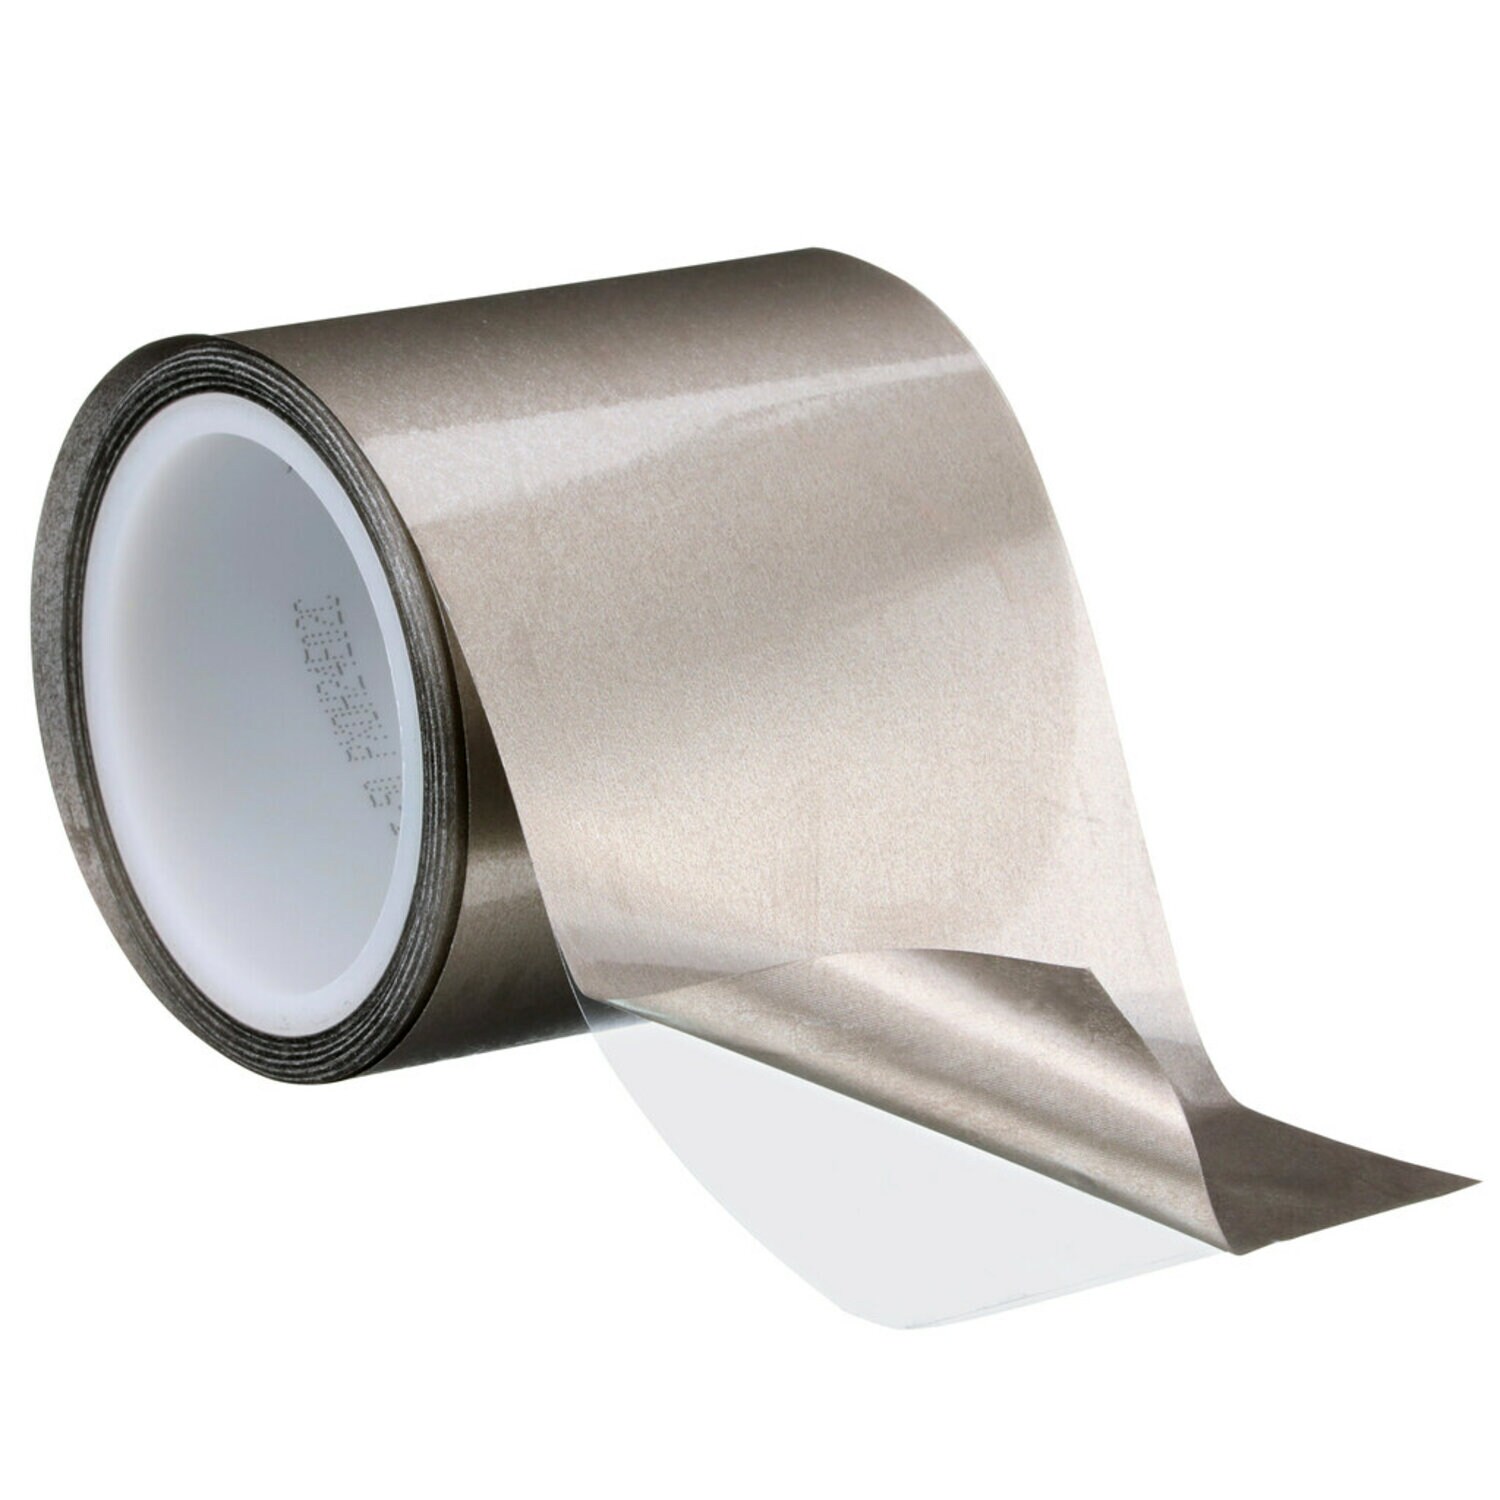 7100313601 - 3M Electrically Conductive Double-Sided Tape 5113DFT-50, Grey, 25 mm x 30 m, 8 Rolls/Case